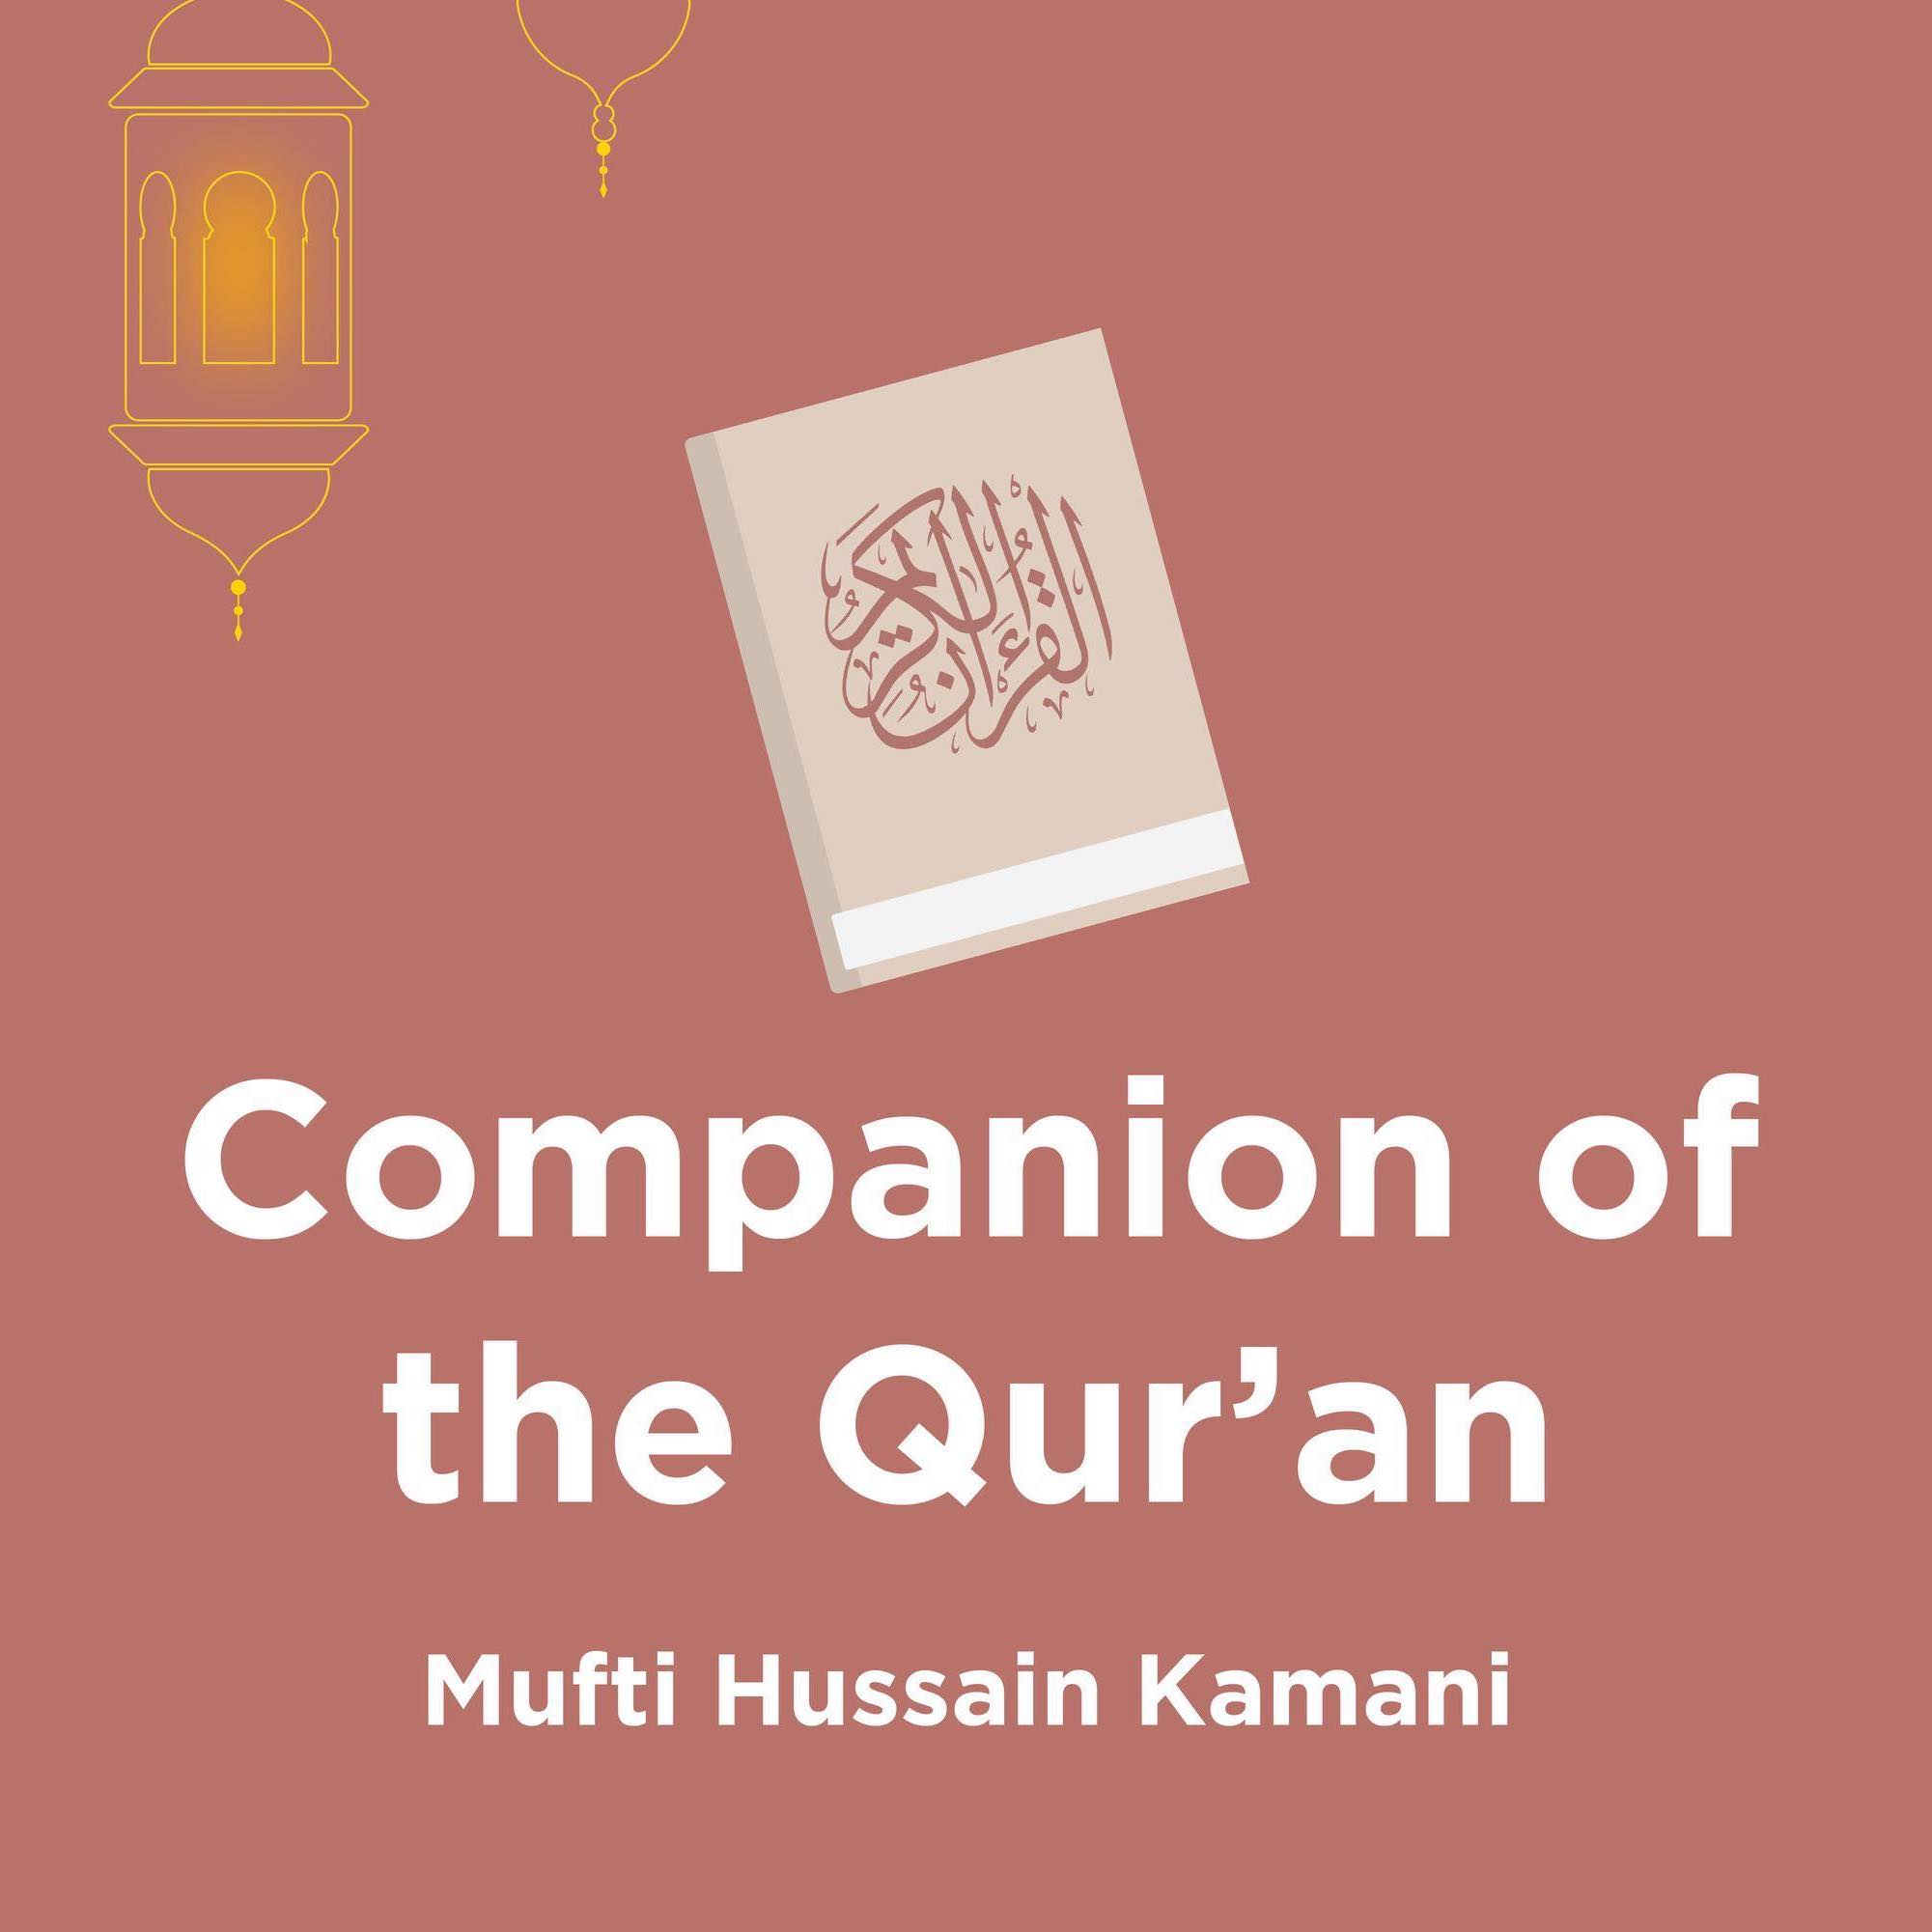 Companion of the Qur’an: EP1 – The journey with the Qur’an